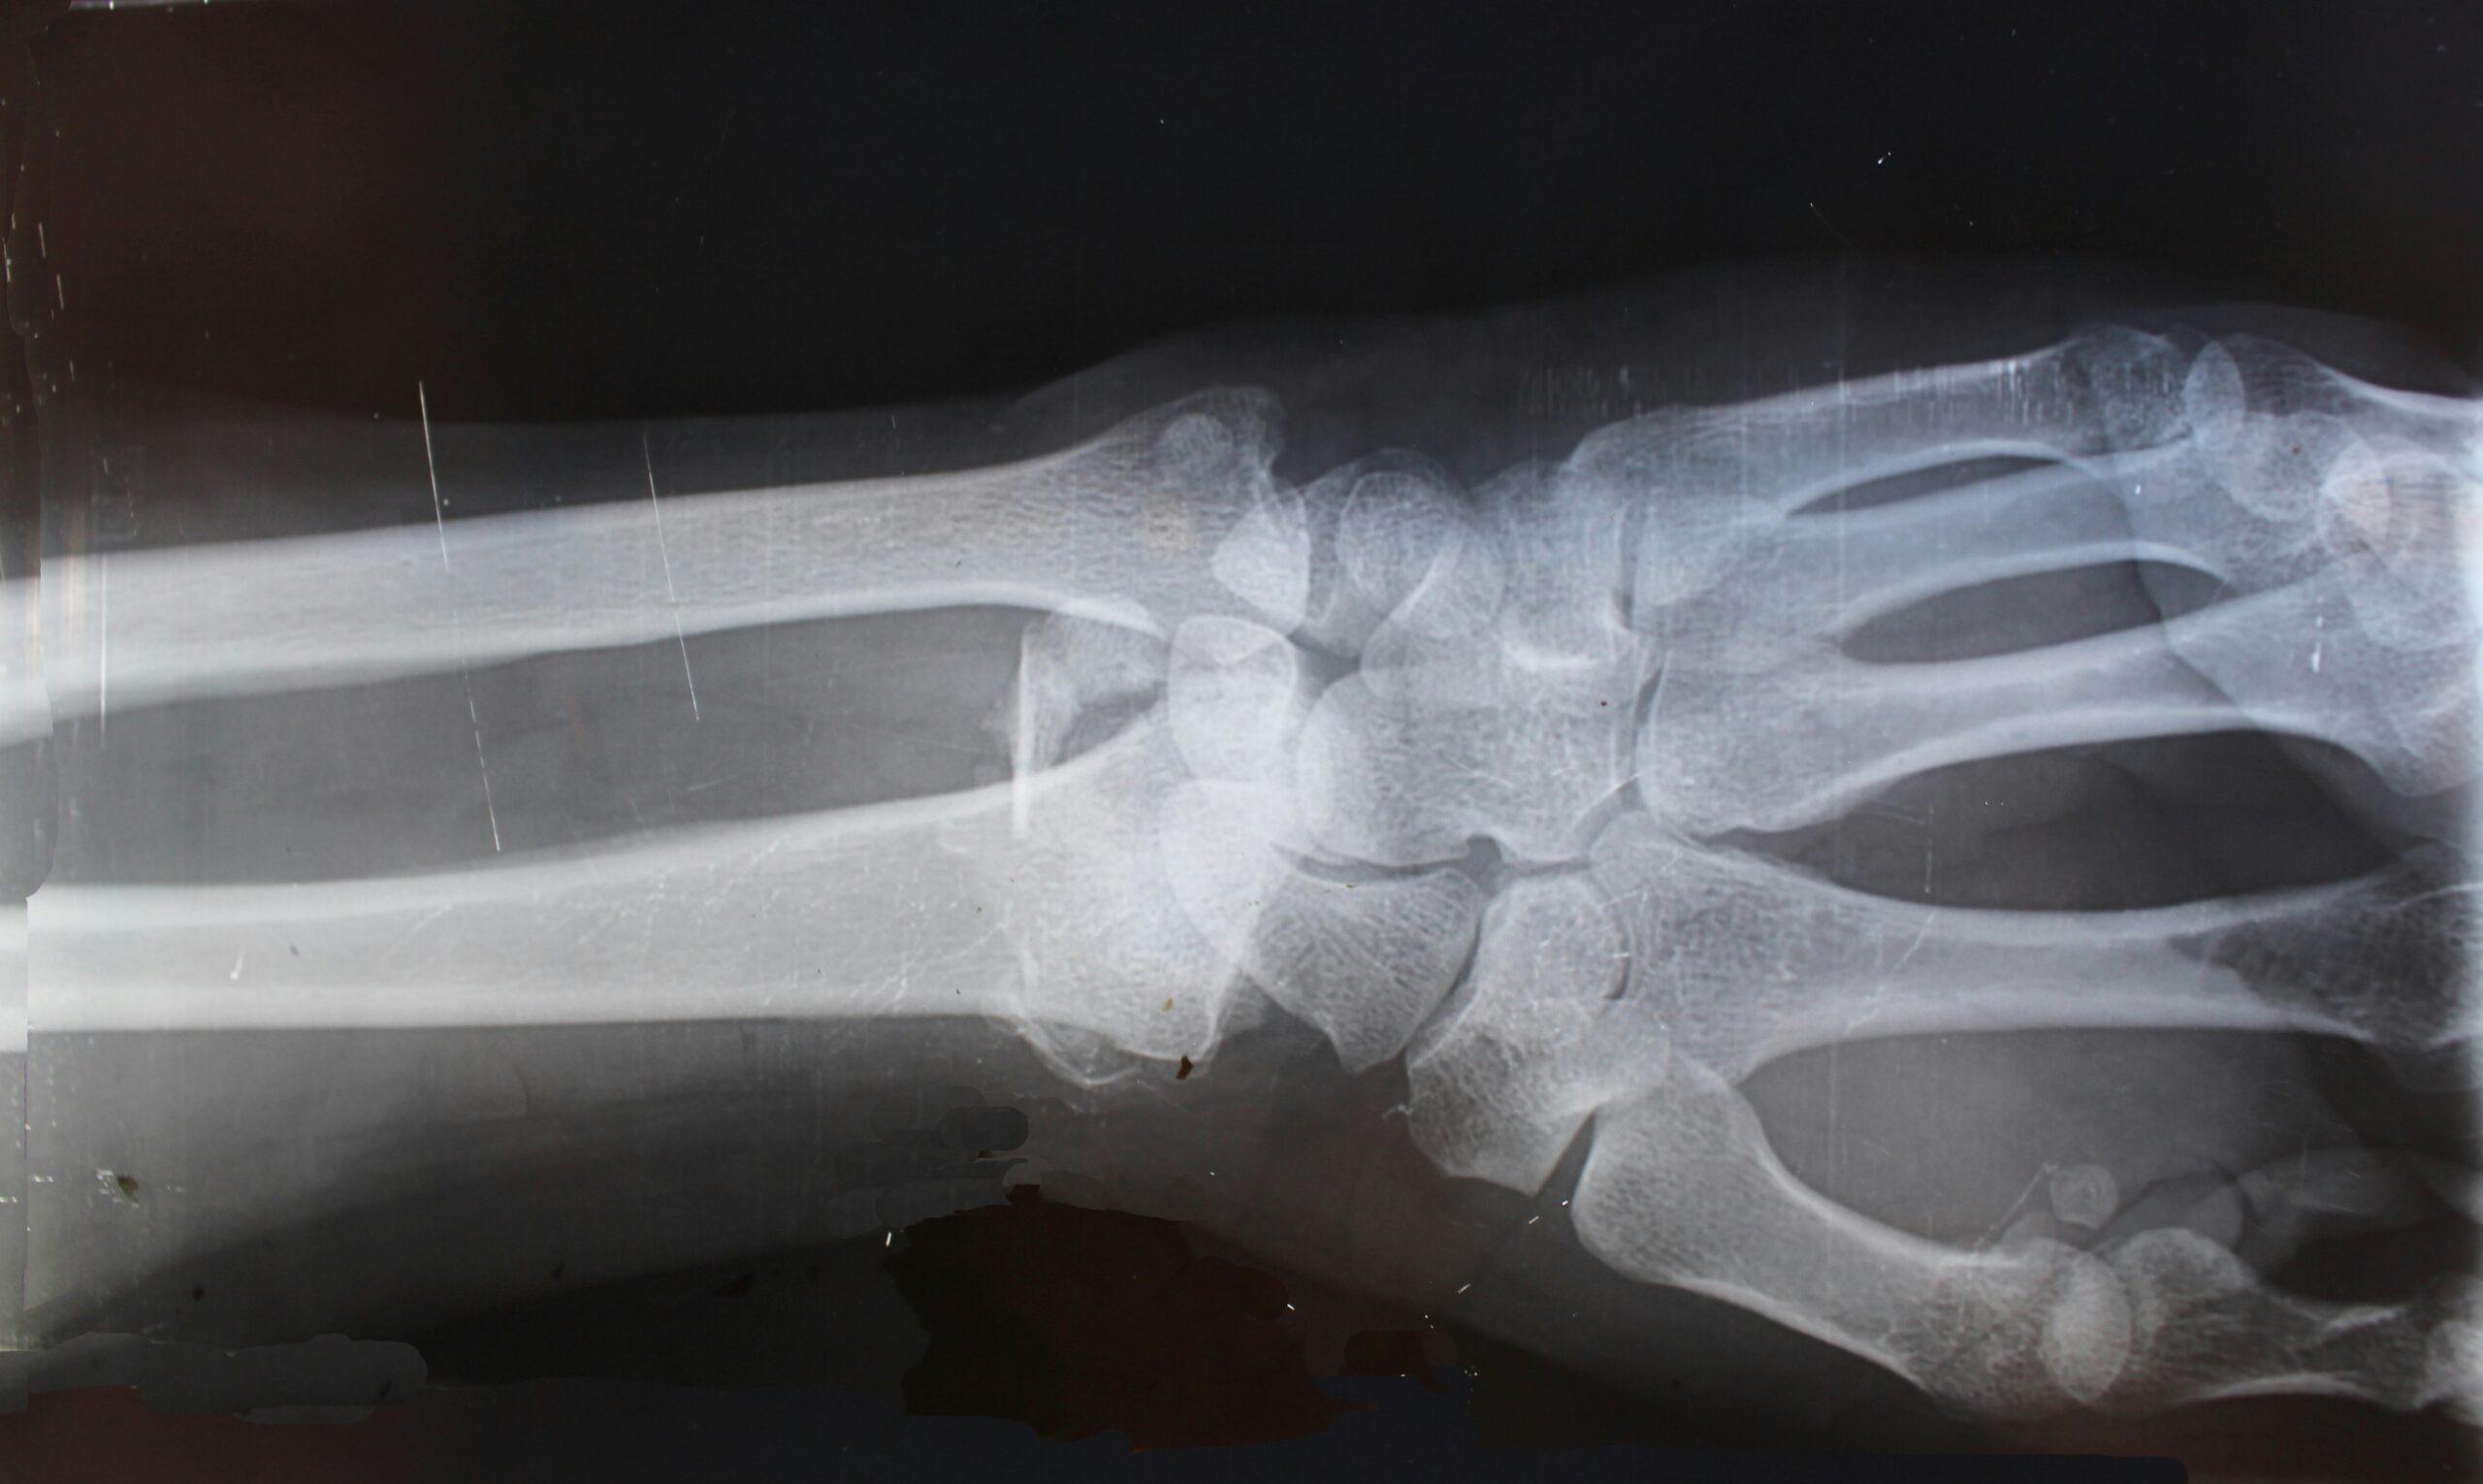 Bone Fracture: What Is, Causes, Diagnosis, Treatment, and Prognosis